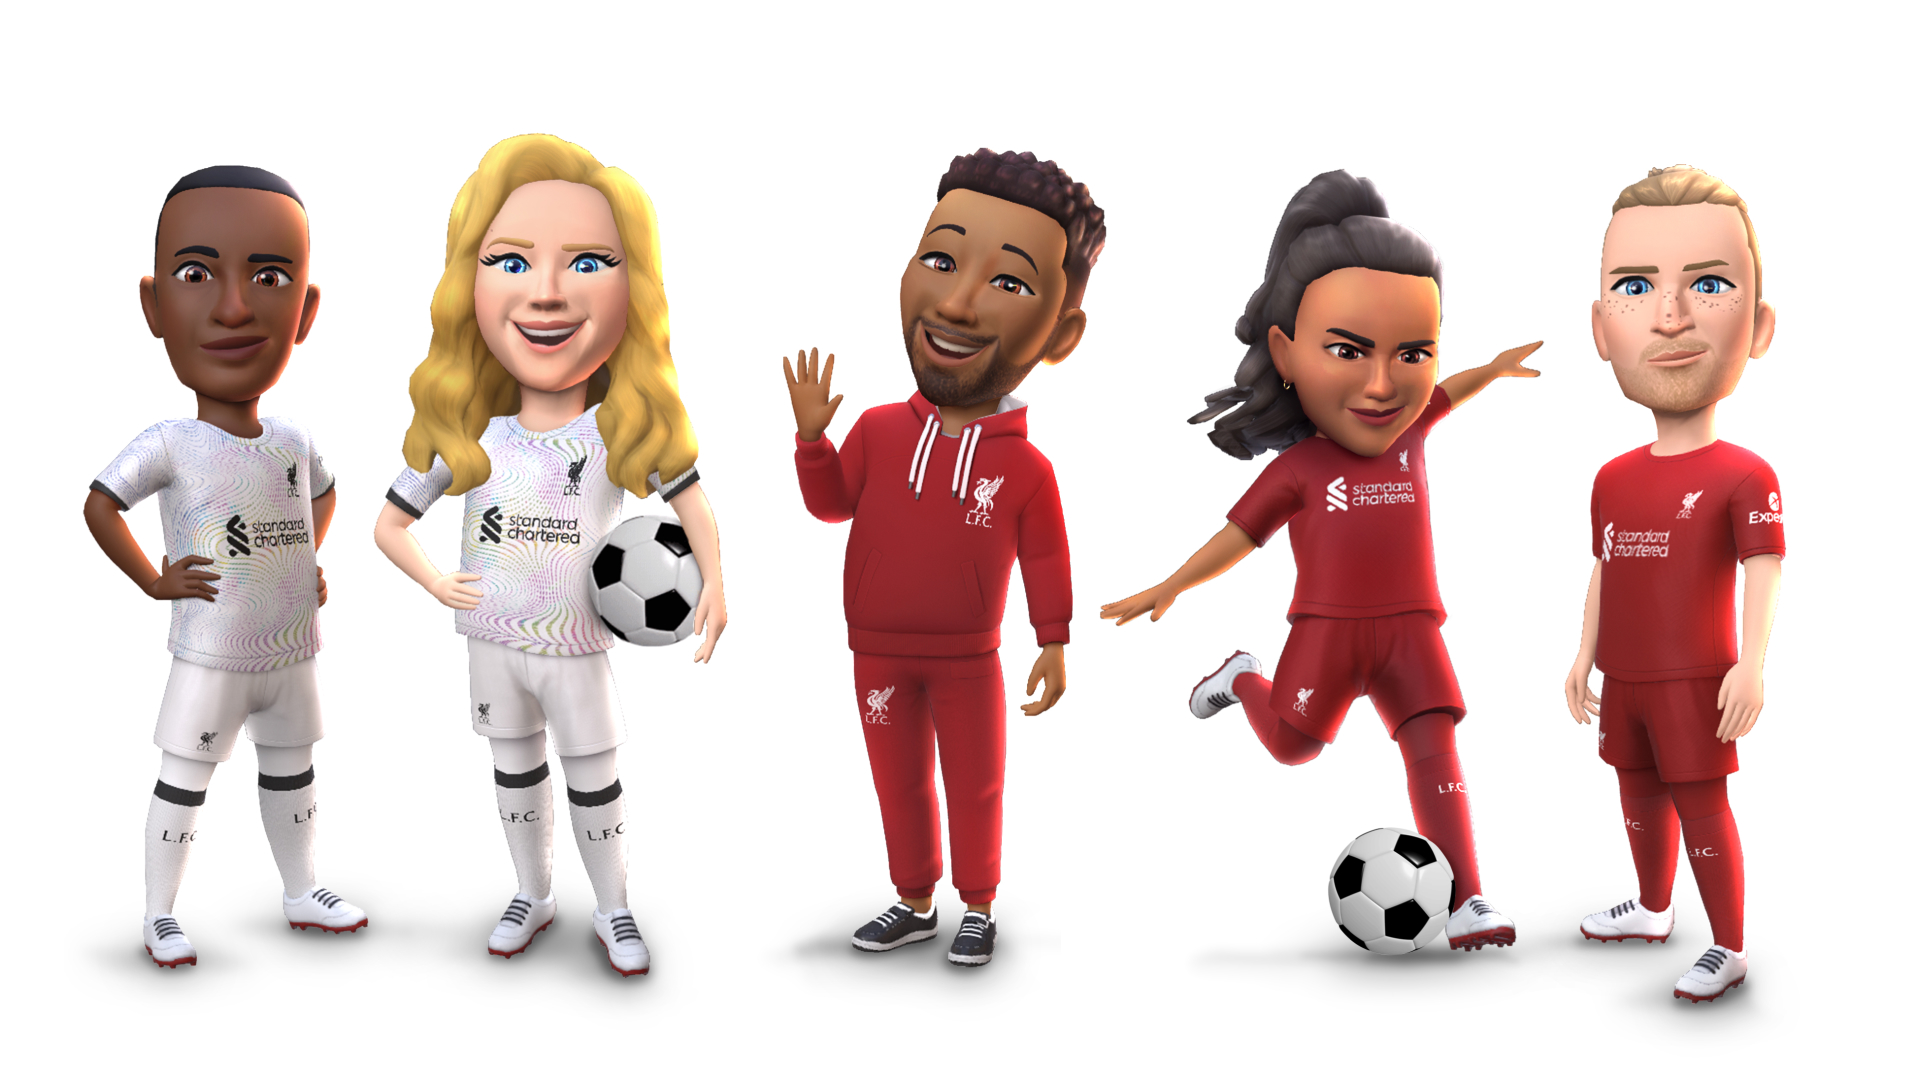 Image showing the Liverpool F.C. merchandise available in the Meta Avatars Store.